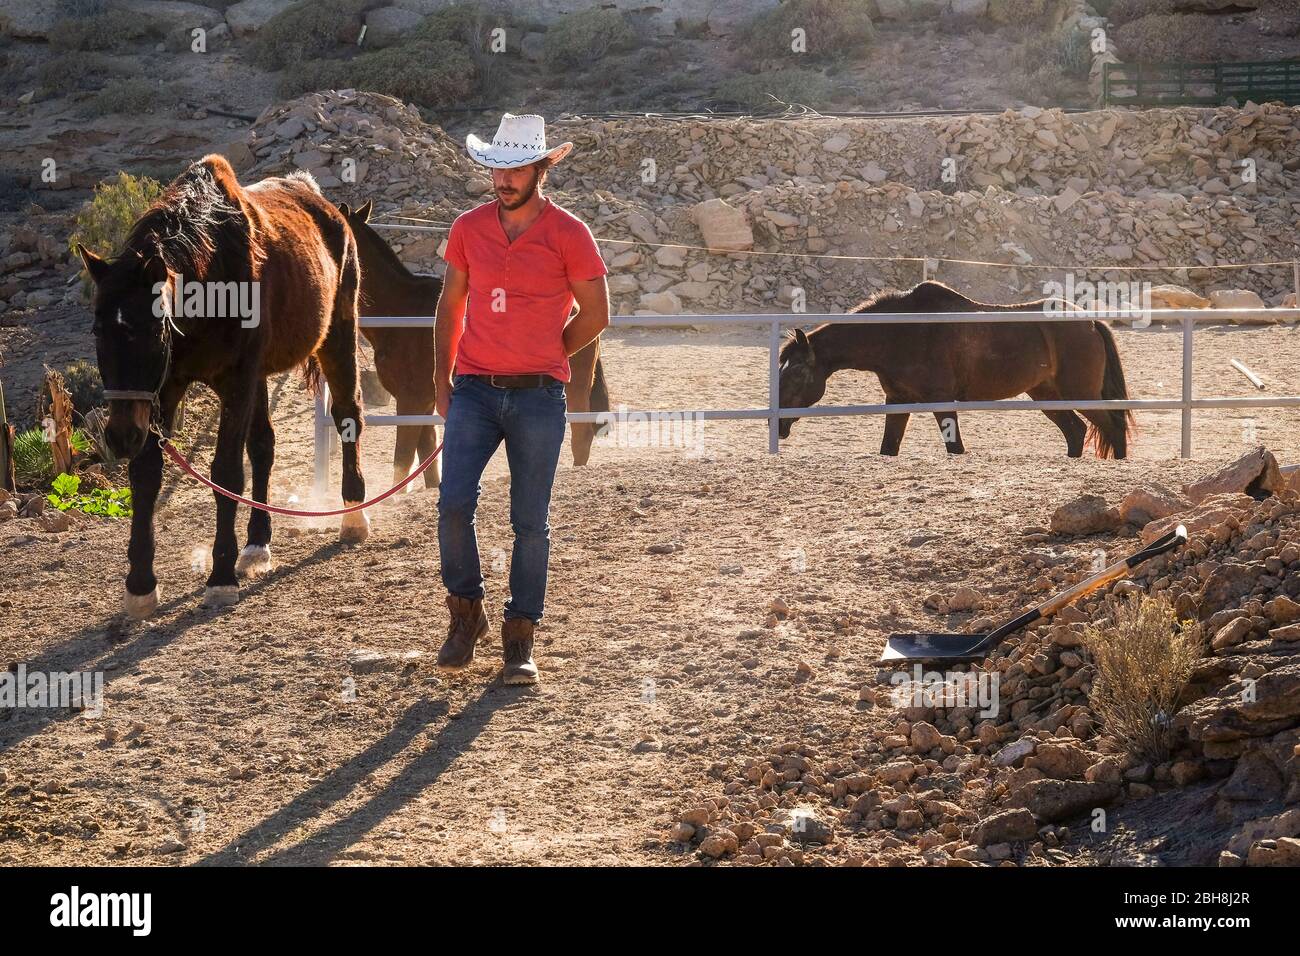 Red shirt cowboy farmer man working with horses in outdoor country side place - nice alternative free lifestyle for people enjoying the nature and the animals Stock Photo